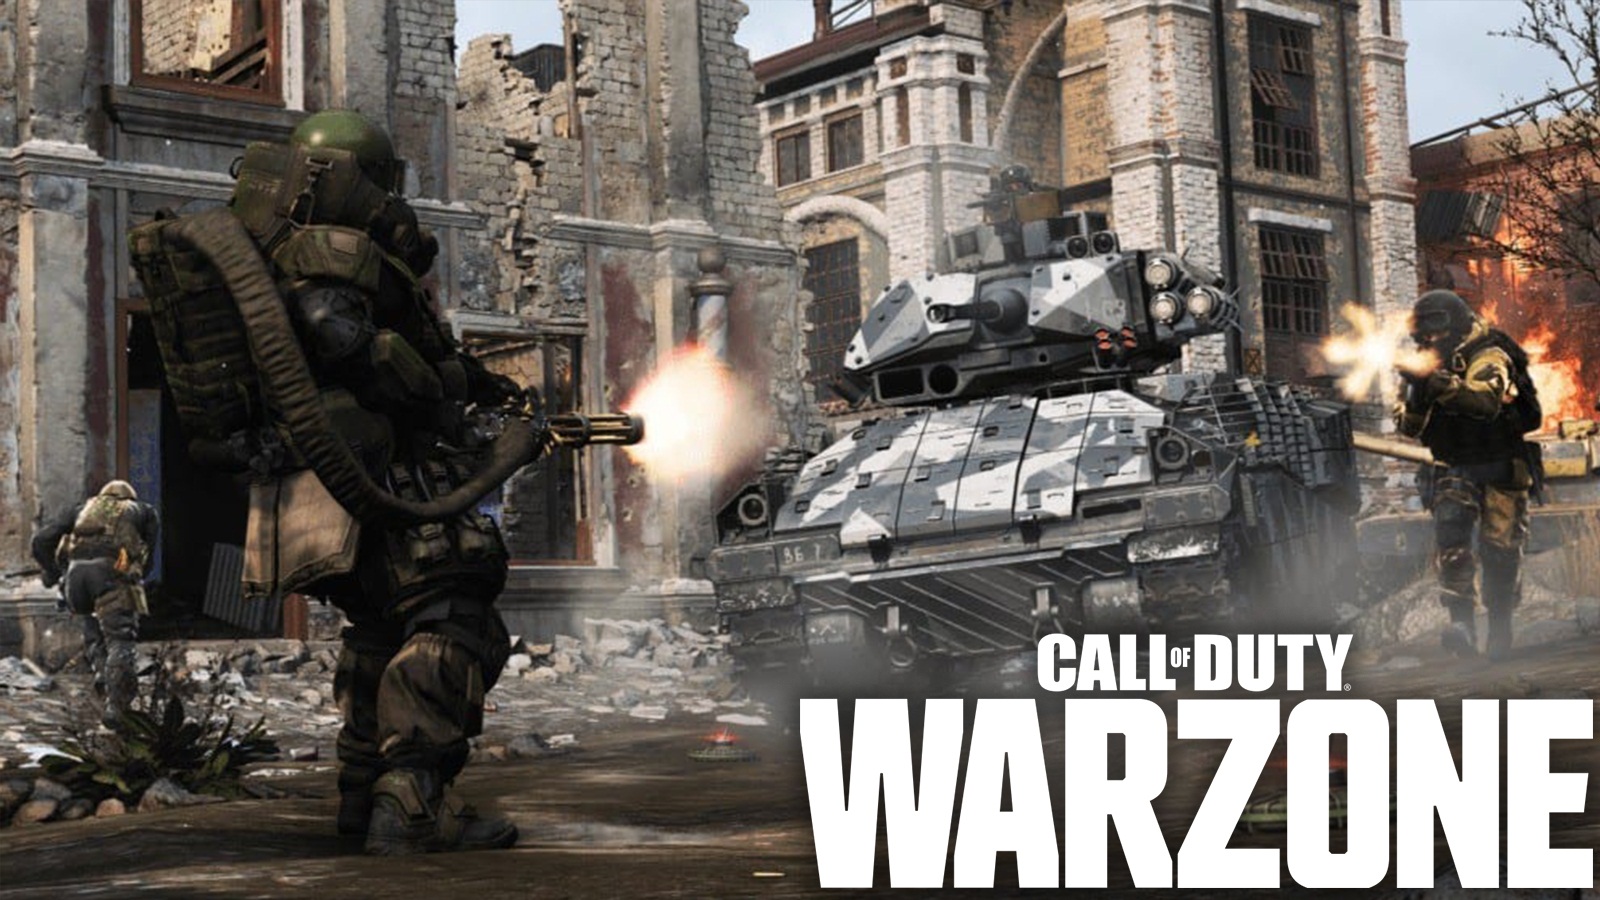 Maximize Your Playing Skills by 5 Major Tips in Call Of Duty: Warzone